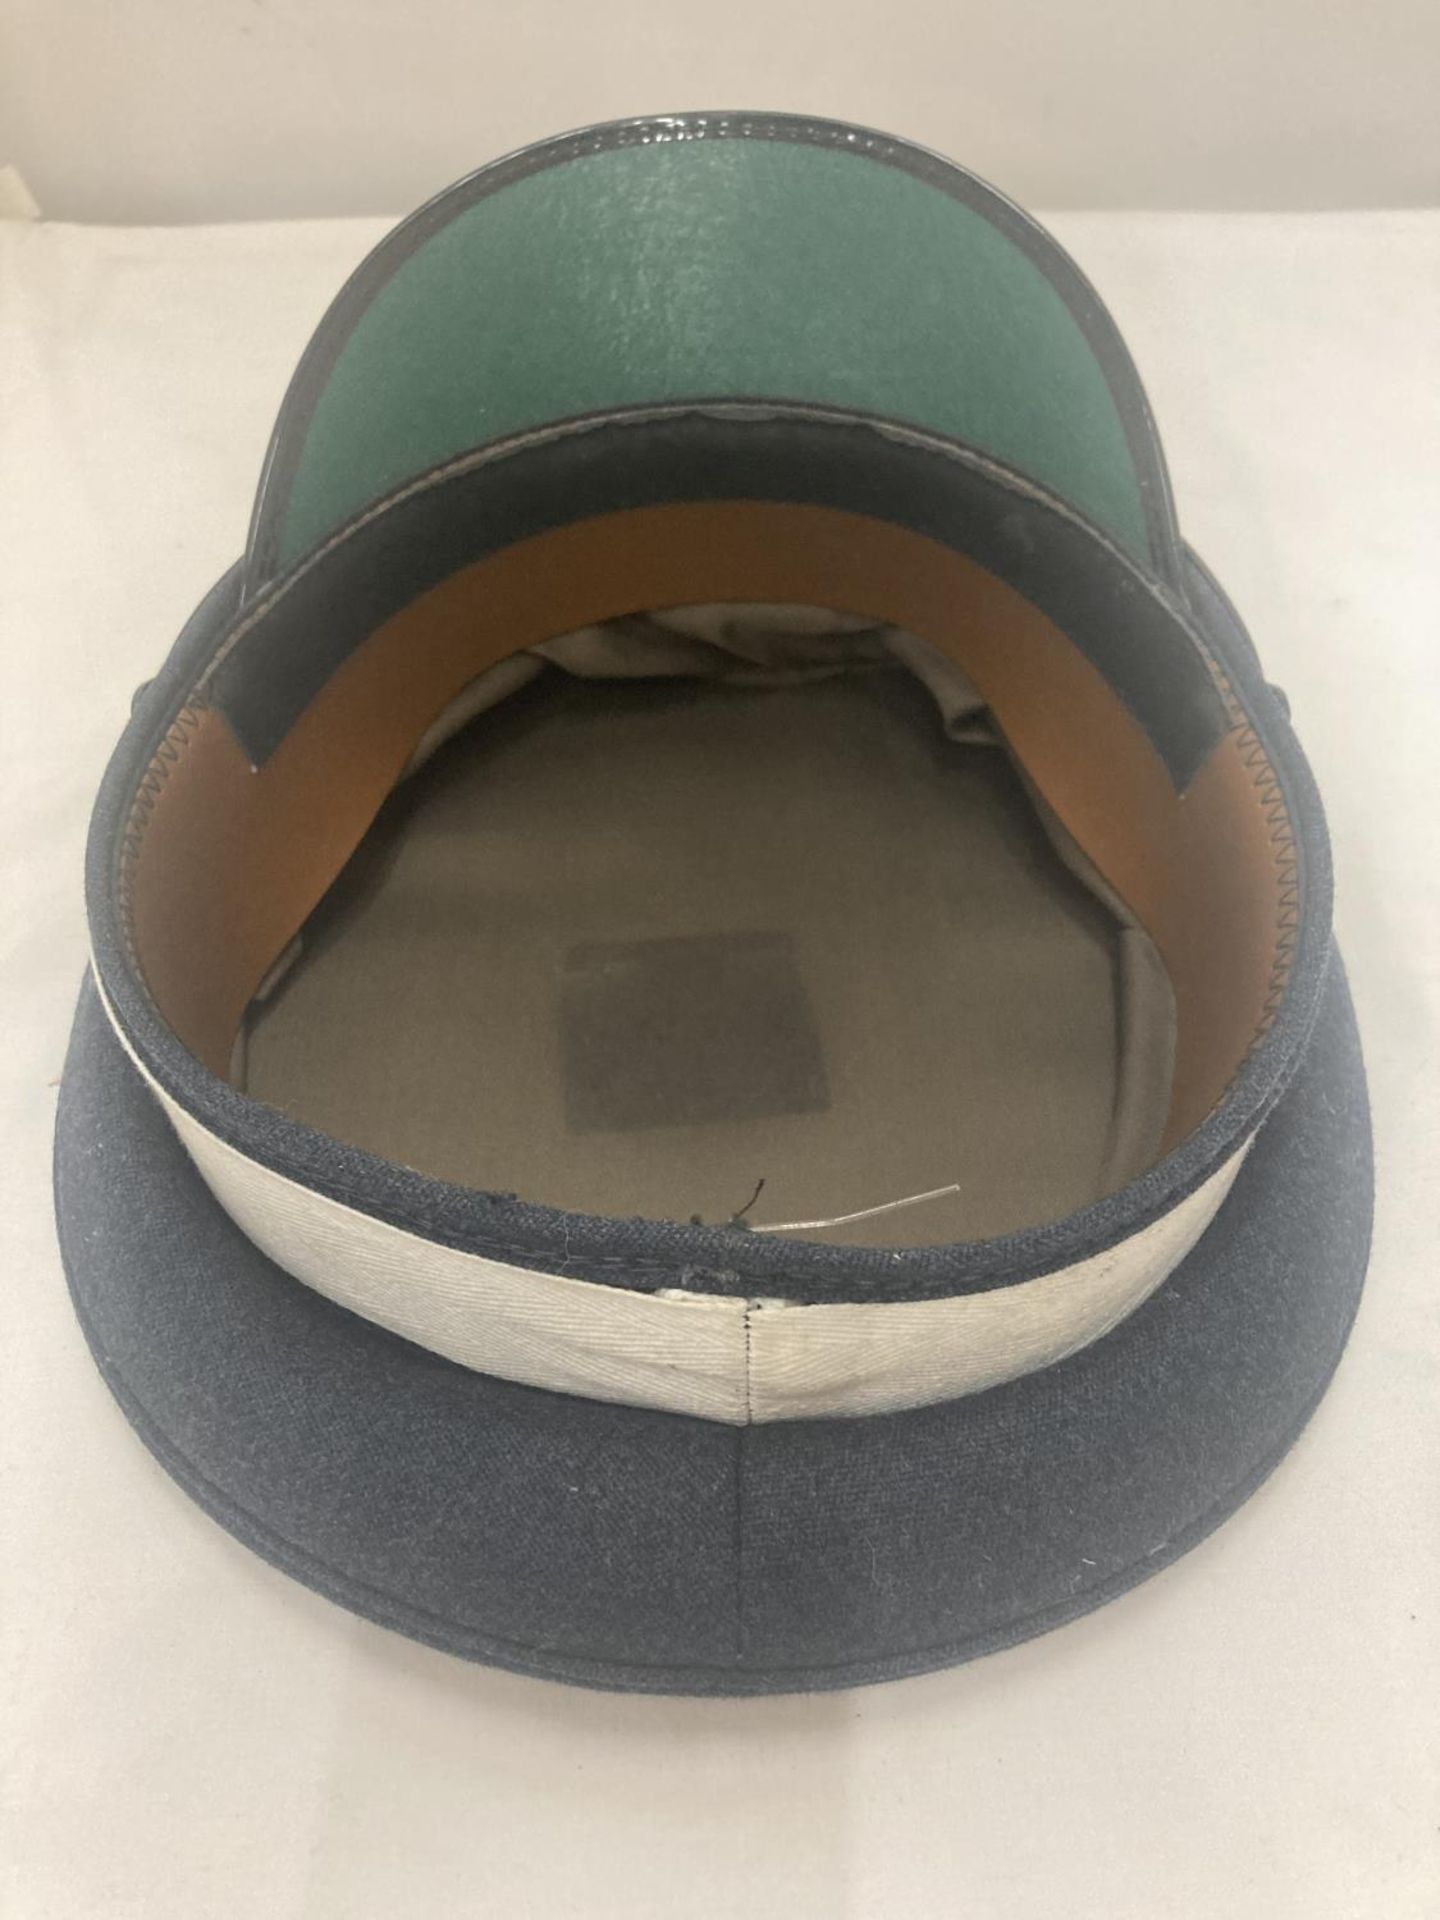 AN R. A. F. MILITARY PEAKED CAP - Image 6 of 6